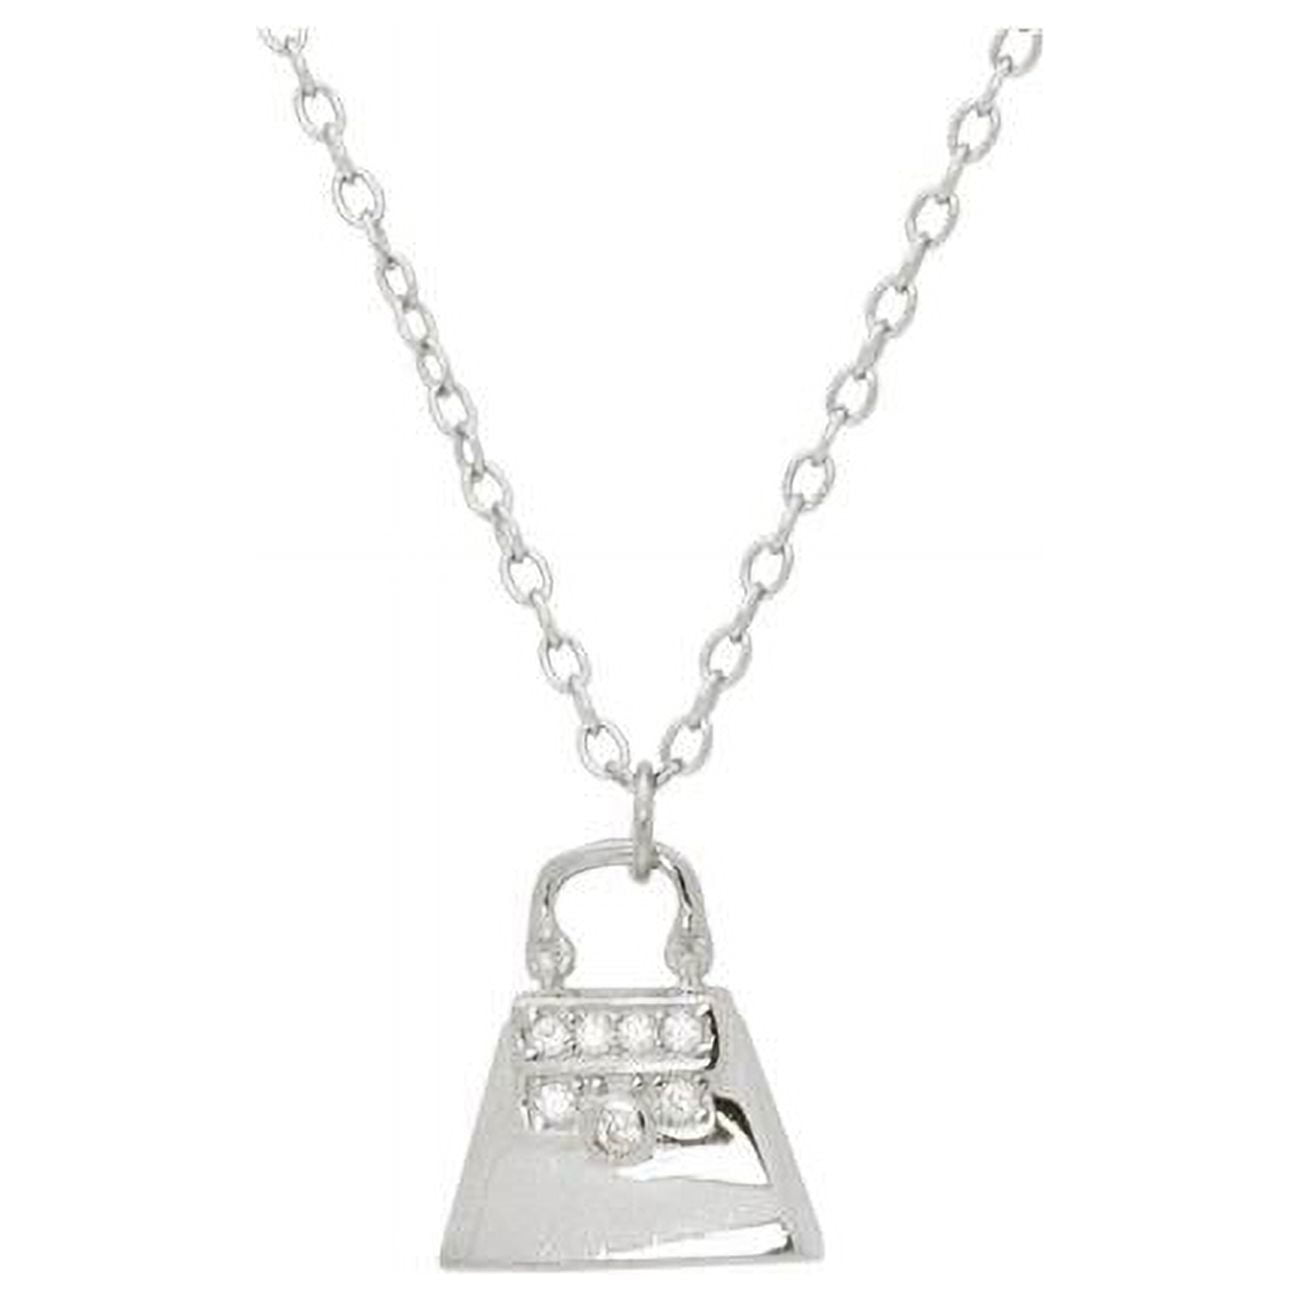 111202 16 & 2 In. Teen Sparkling Cz Purse Pendant Necklace In Sterling Silver